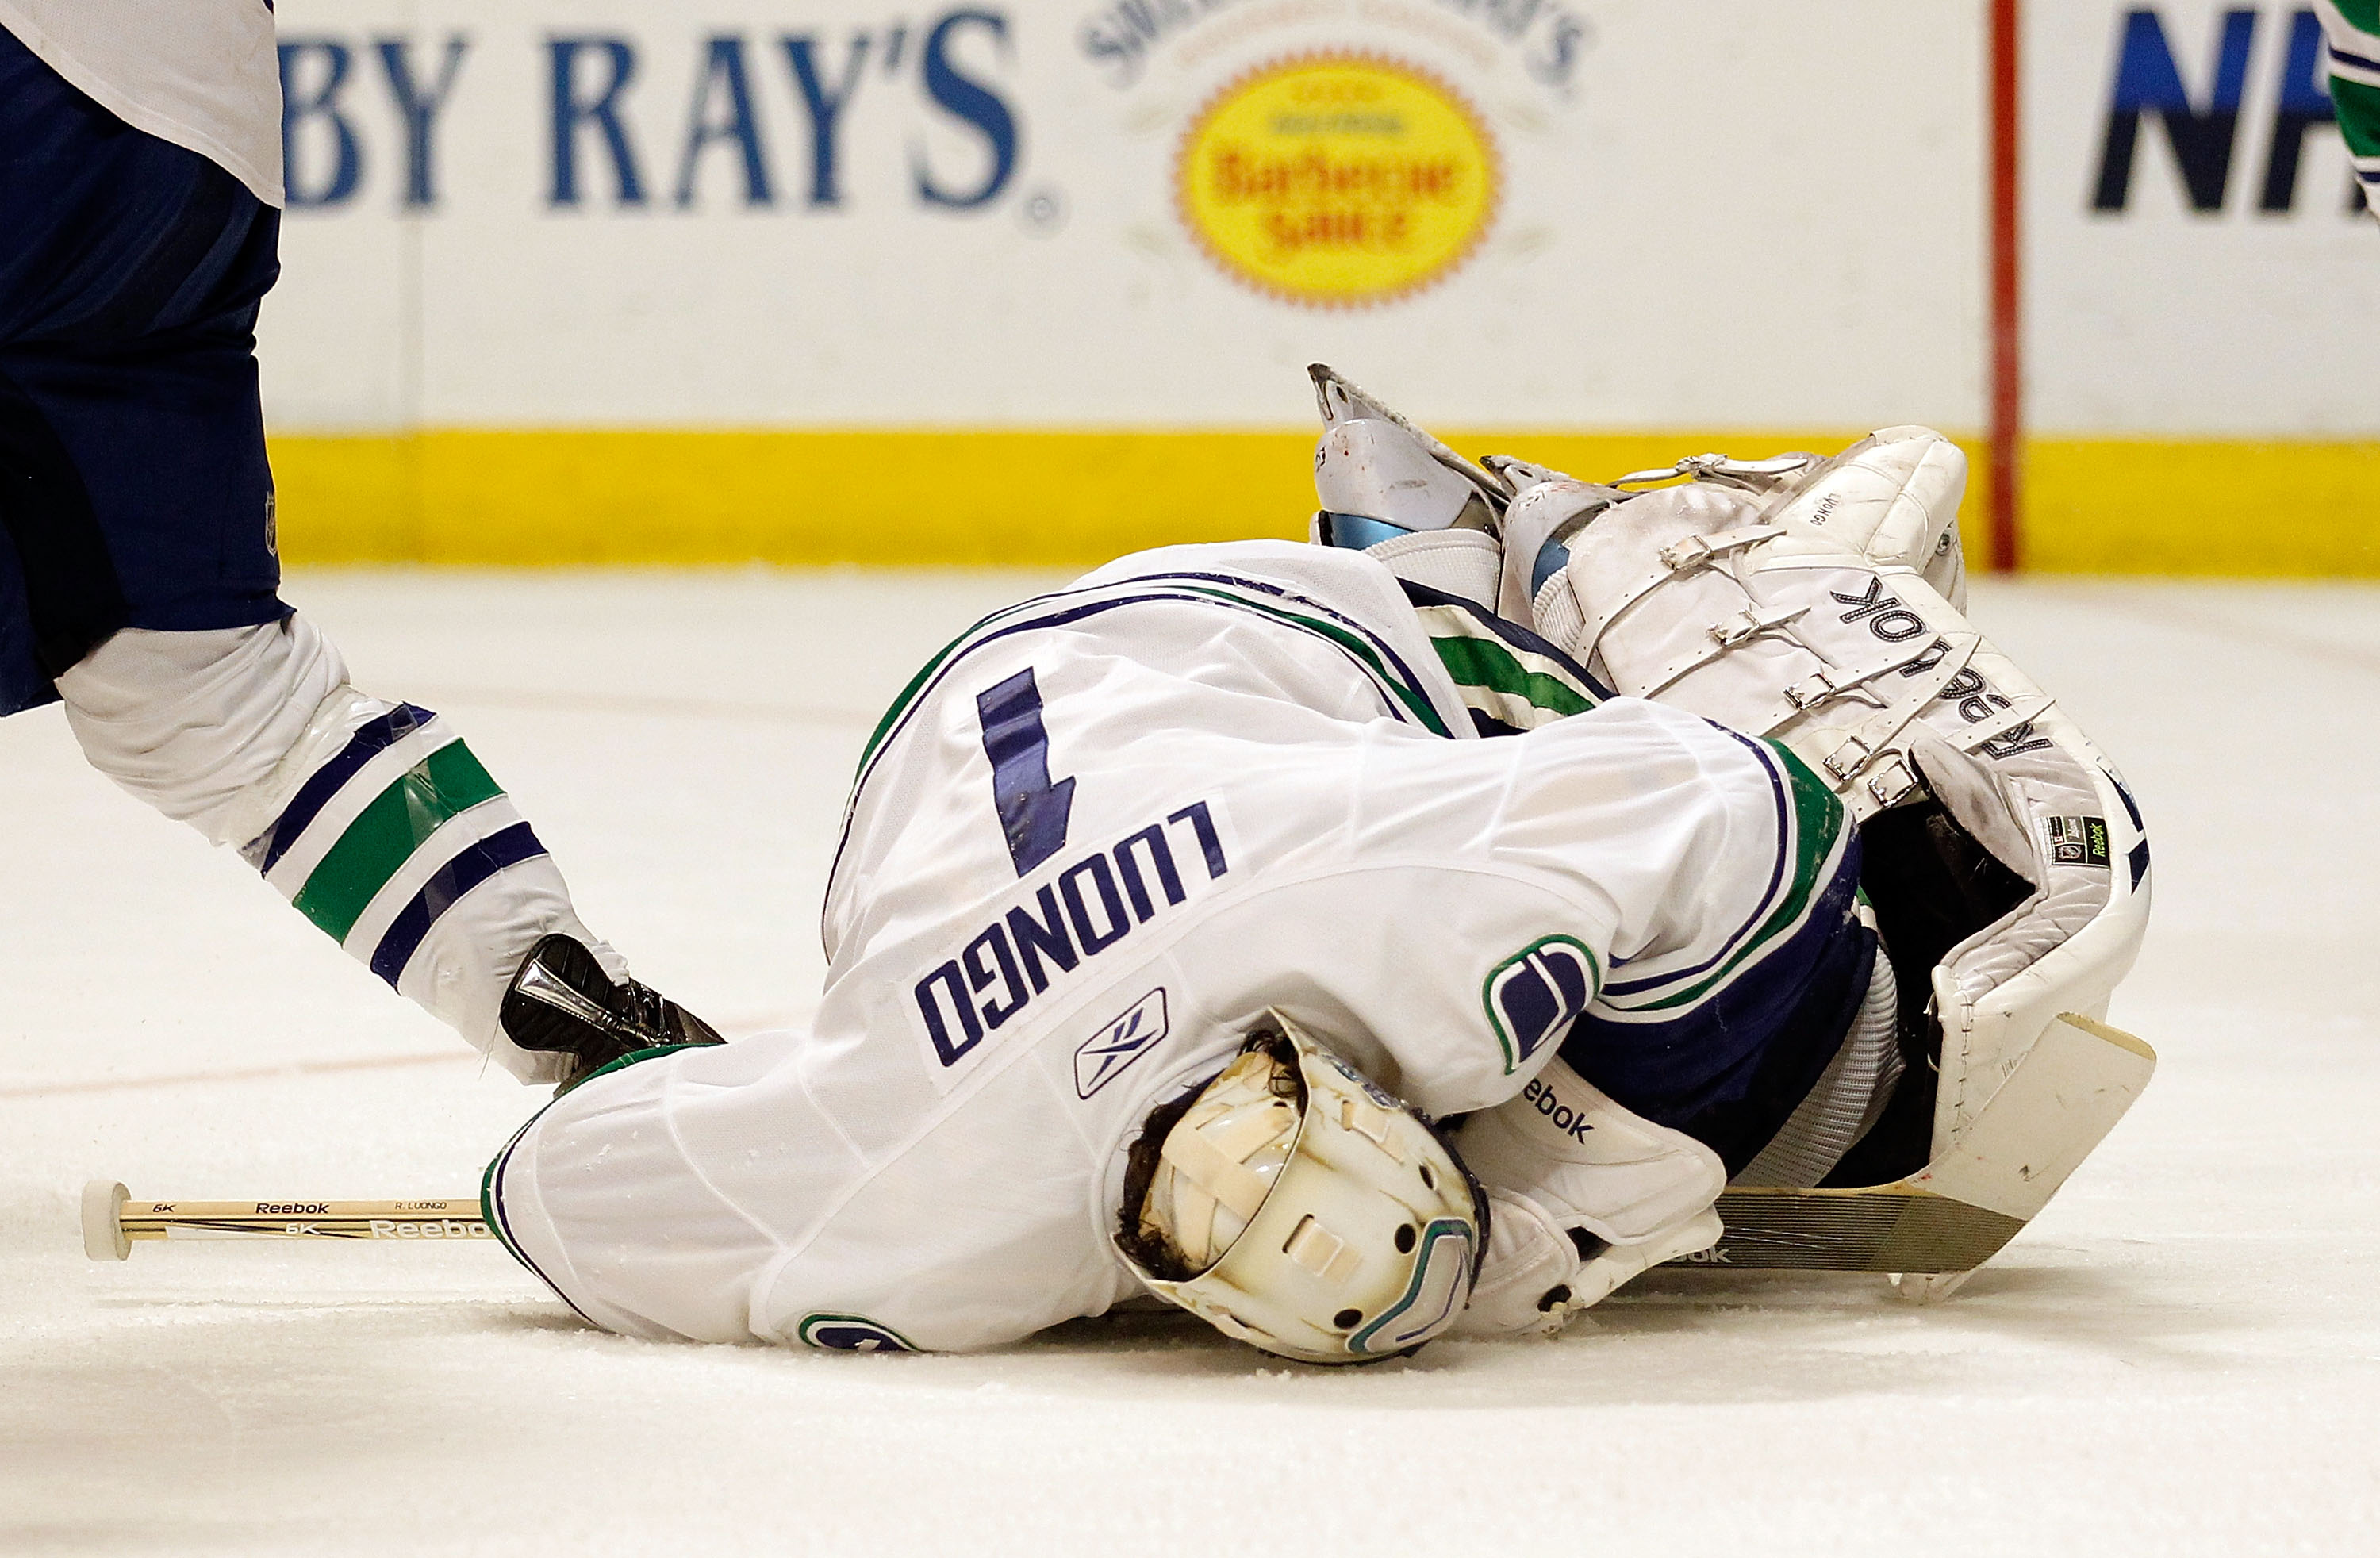 CHICAGO - MAY 03: Roberto Luongo #1 of the Vancouver Canucks falls on the puck for a save against the Chicago Blackhawks in Game Two of the Western Conference Semifinals during the 2010 NHL Stanley Cup Playoffs at United Center on May 3, 2010 in Chicago,